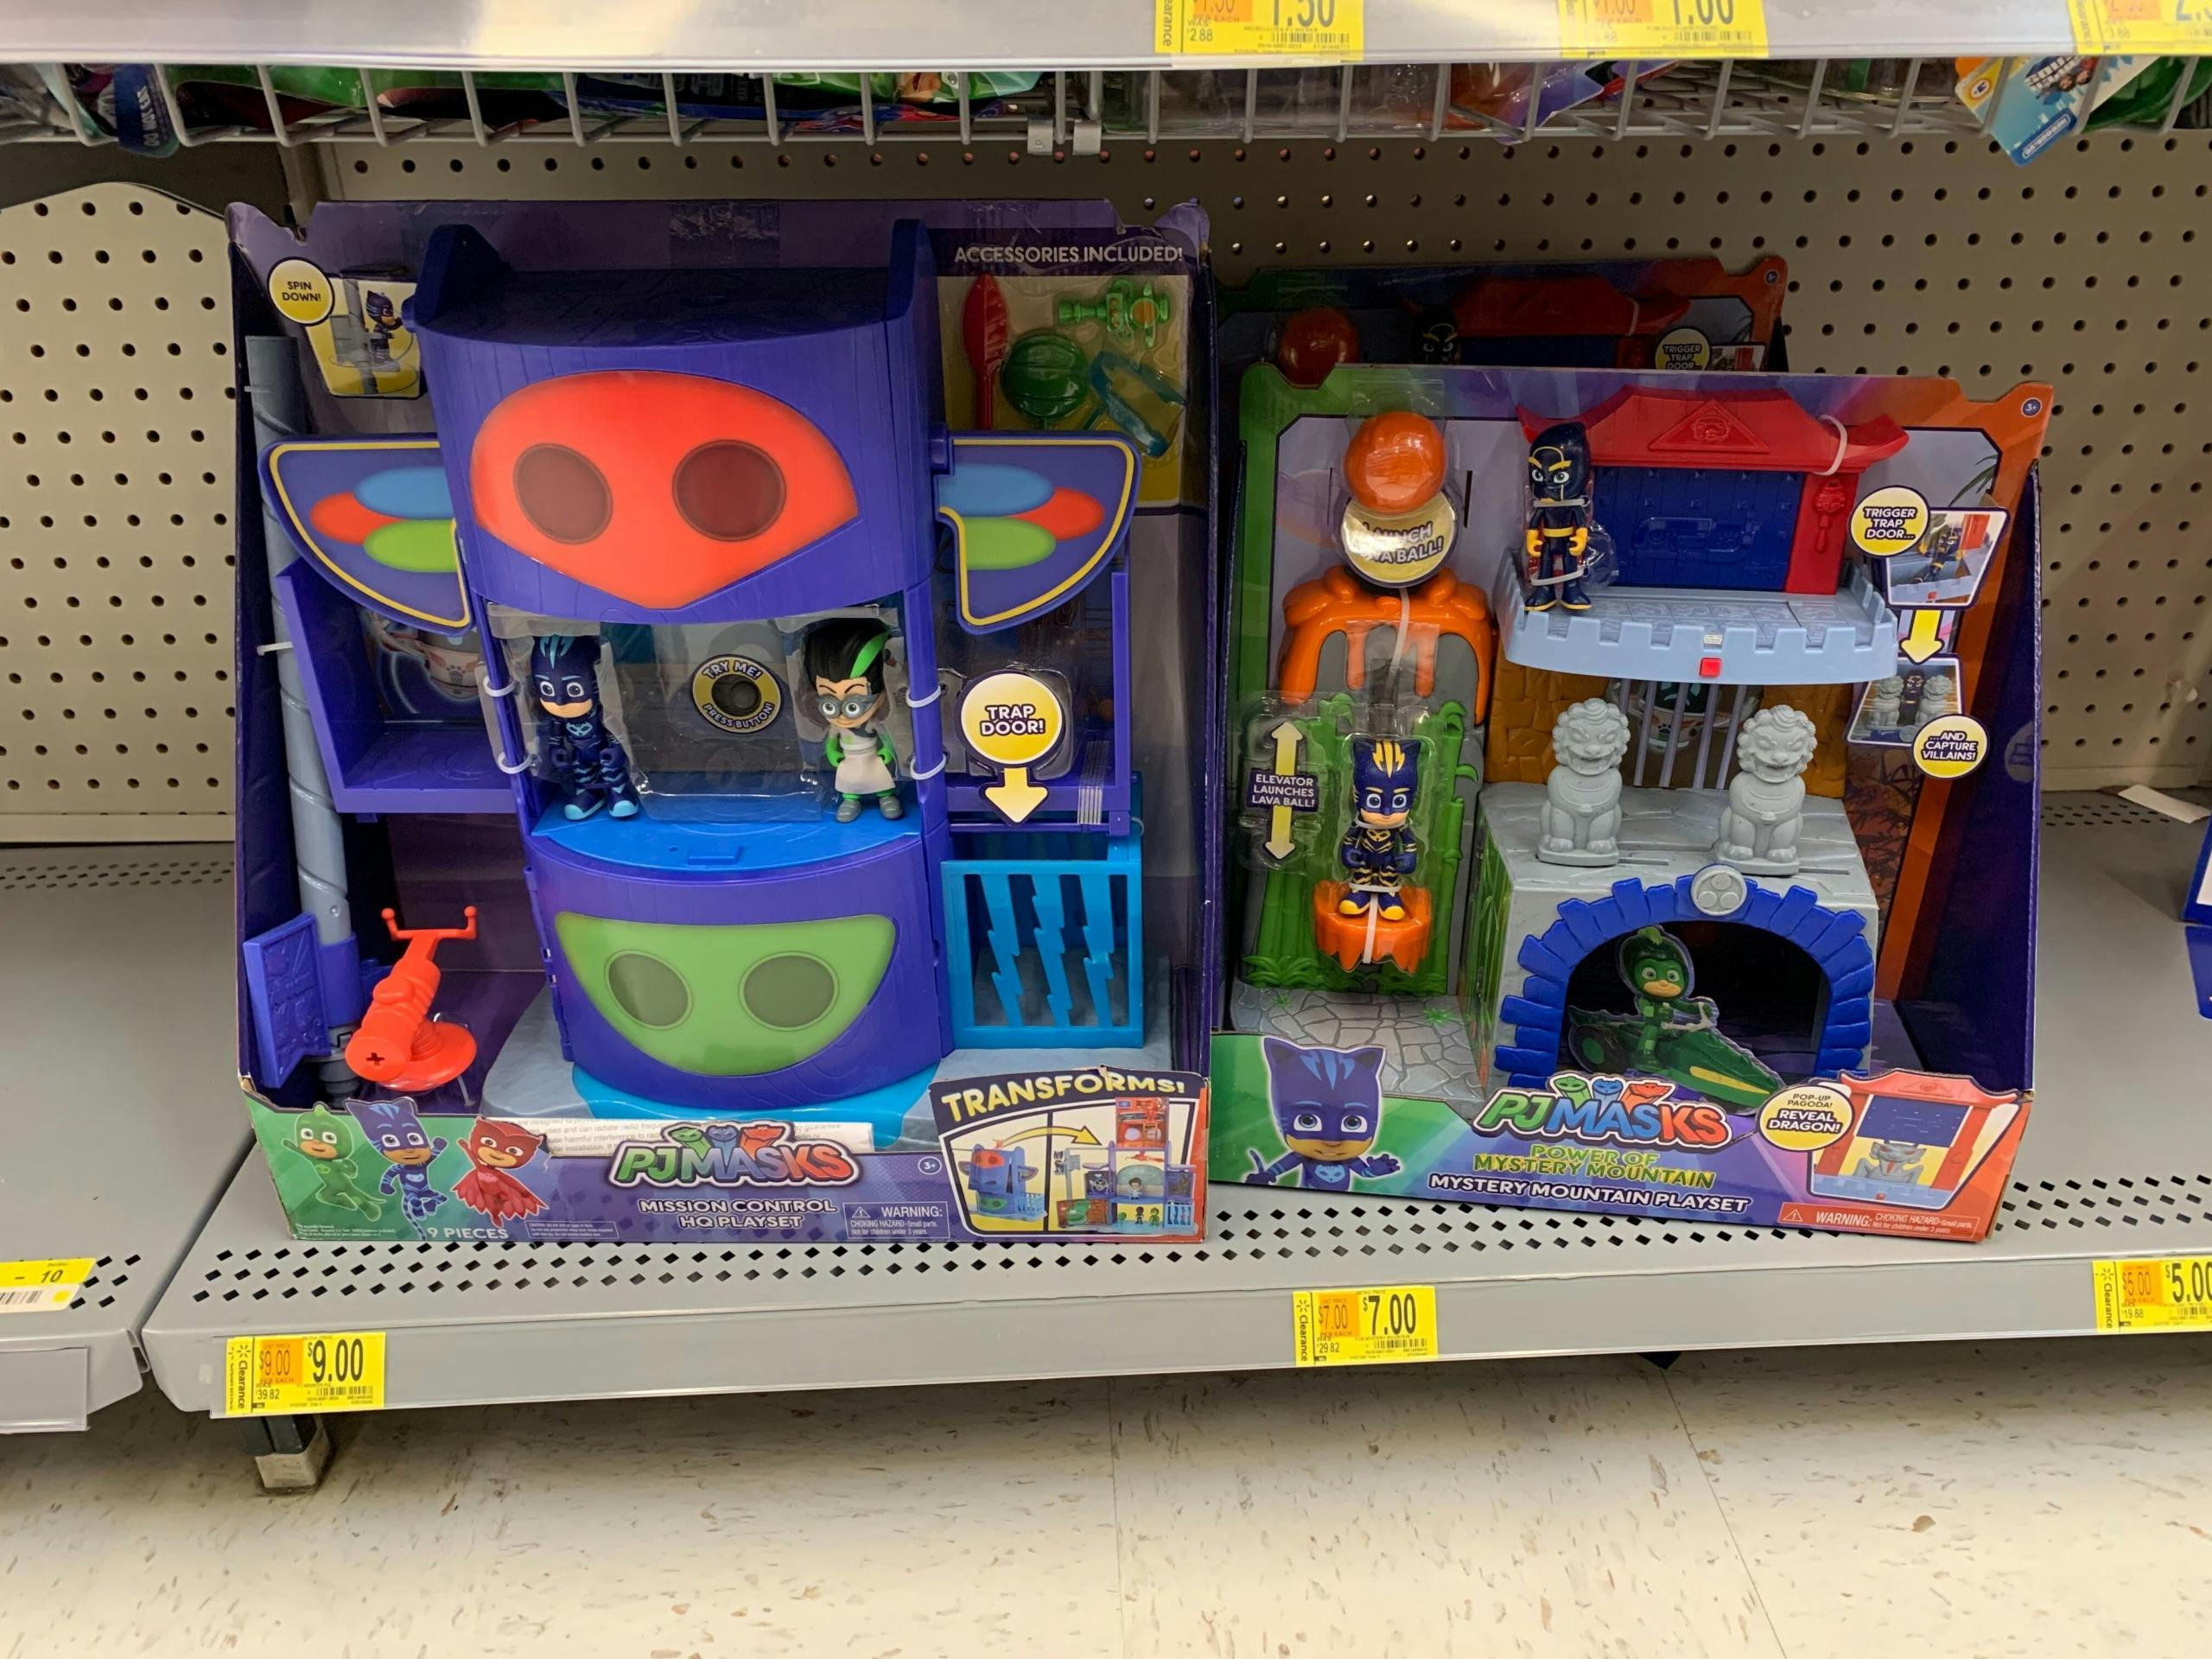 clearance baby toys